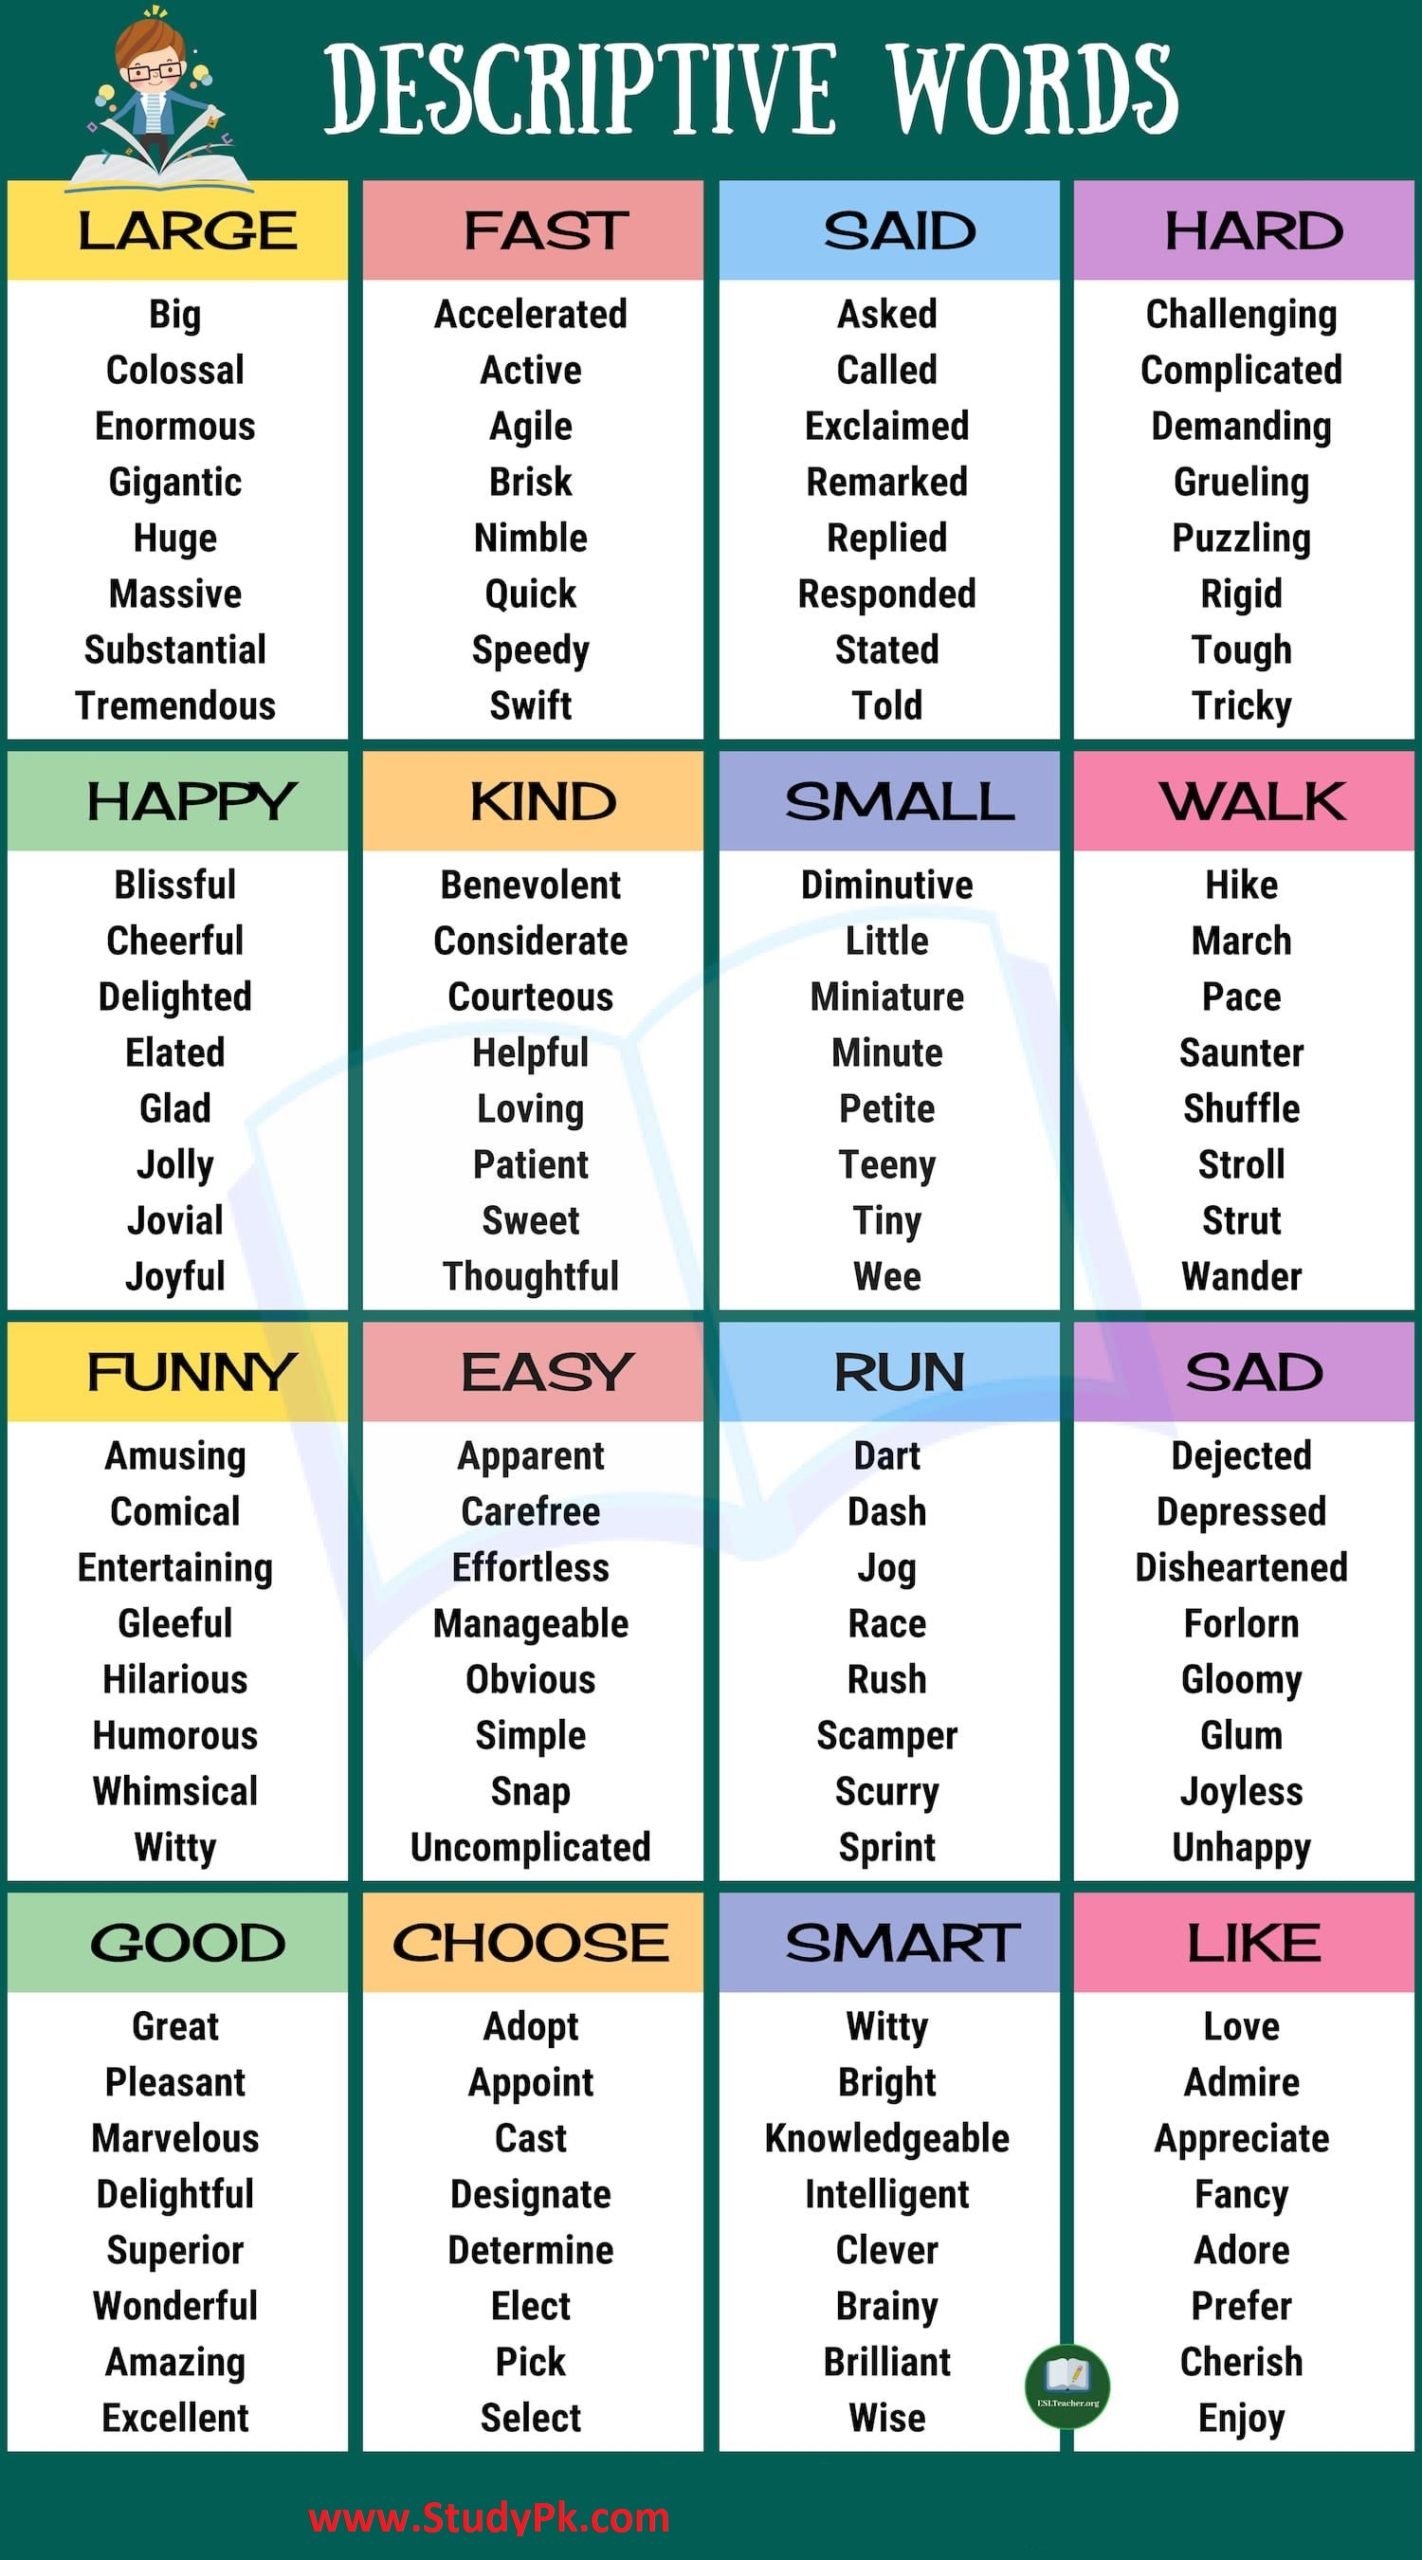 List of Descriptive Words  Adjectives Adverbs and Gerunds 